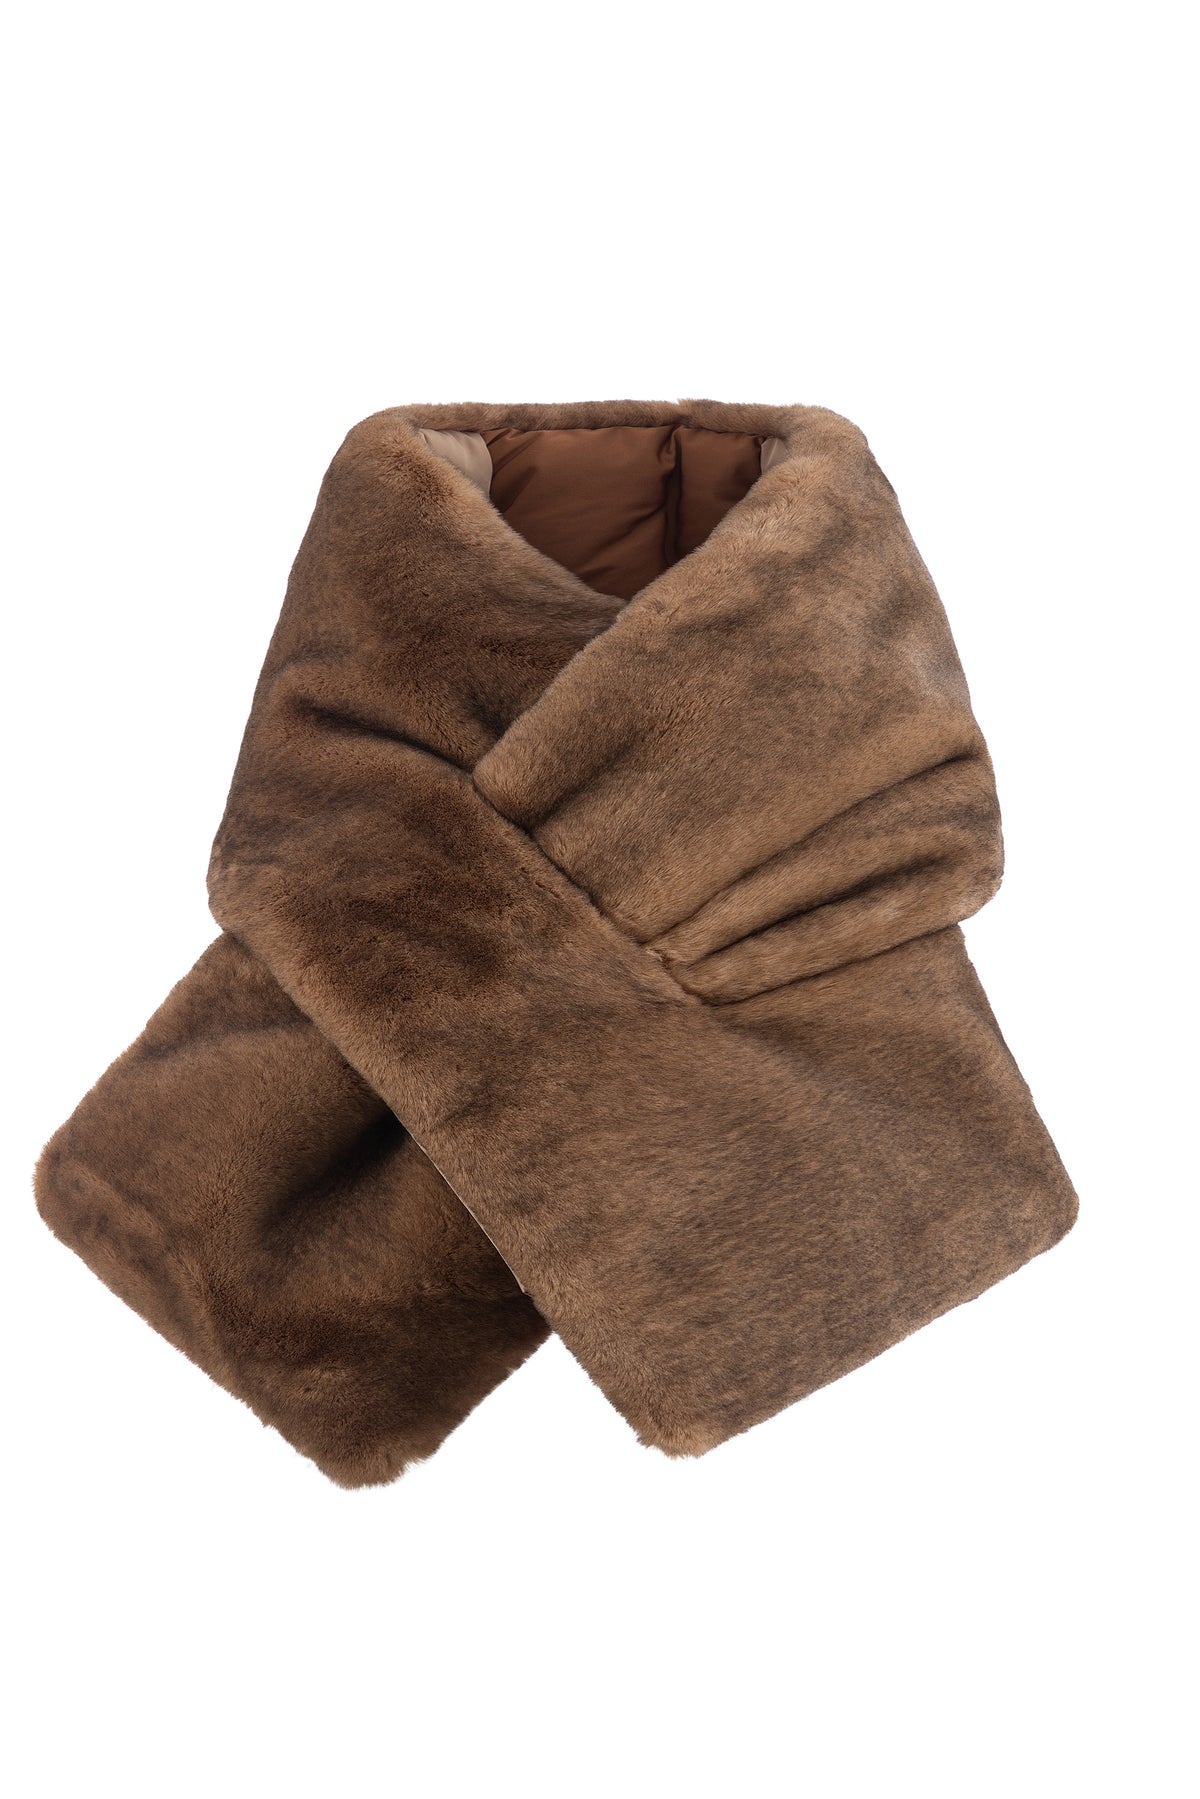 Reversible scarf in Sand/Brown